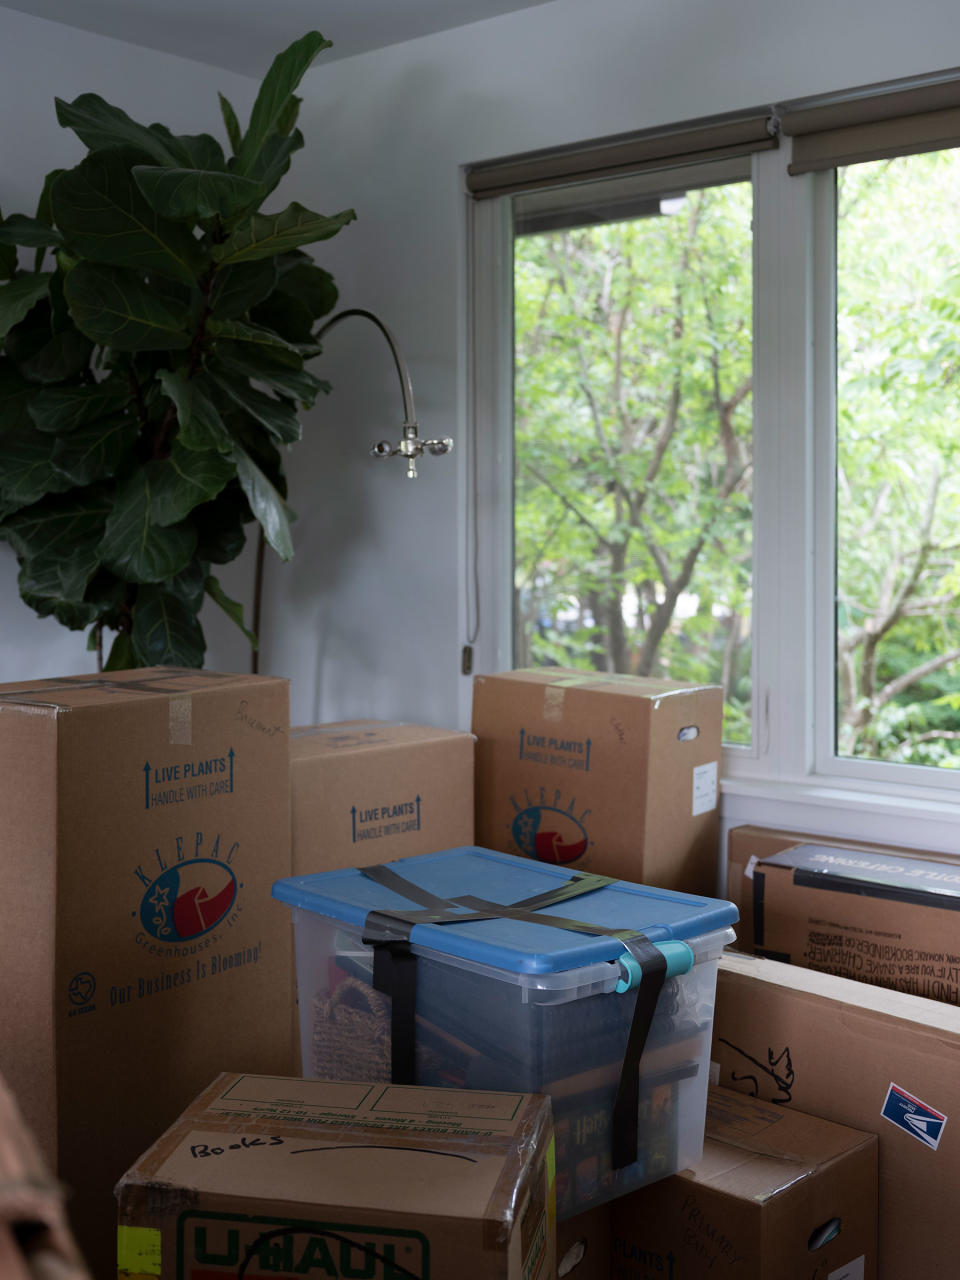 Boxes wait to be taken by the movers as Karen's family prepares to leave Austin.<span class="copyright">riel Sturchio for TIME</span>